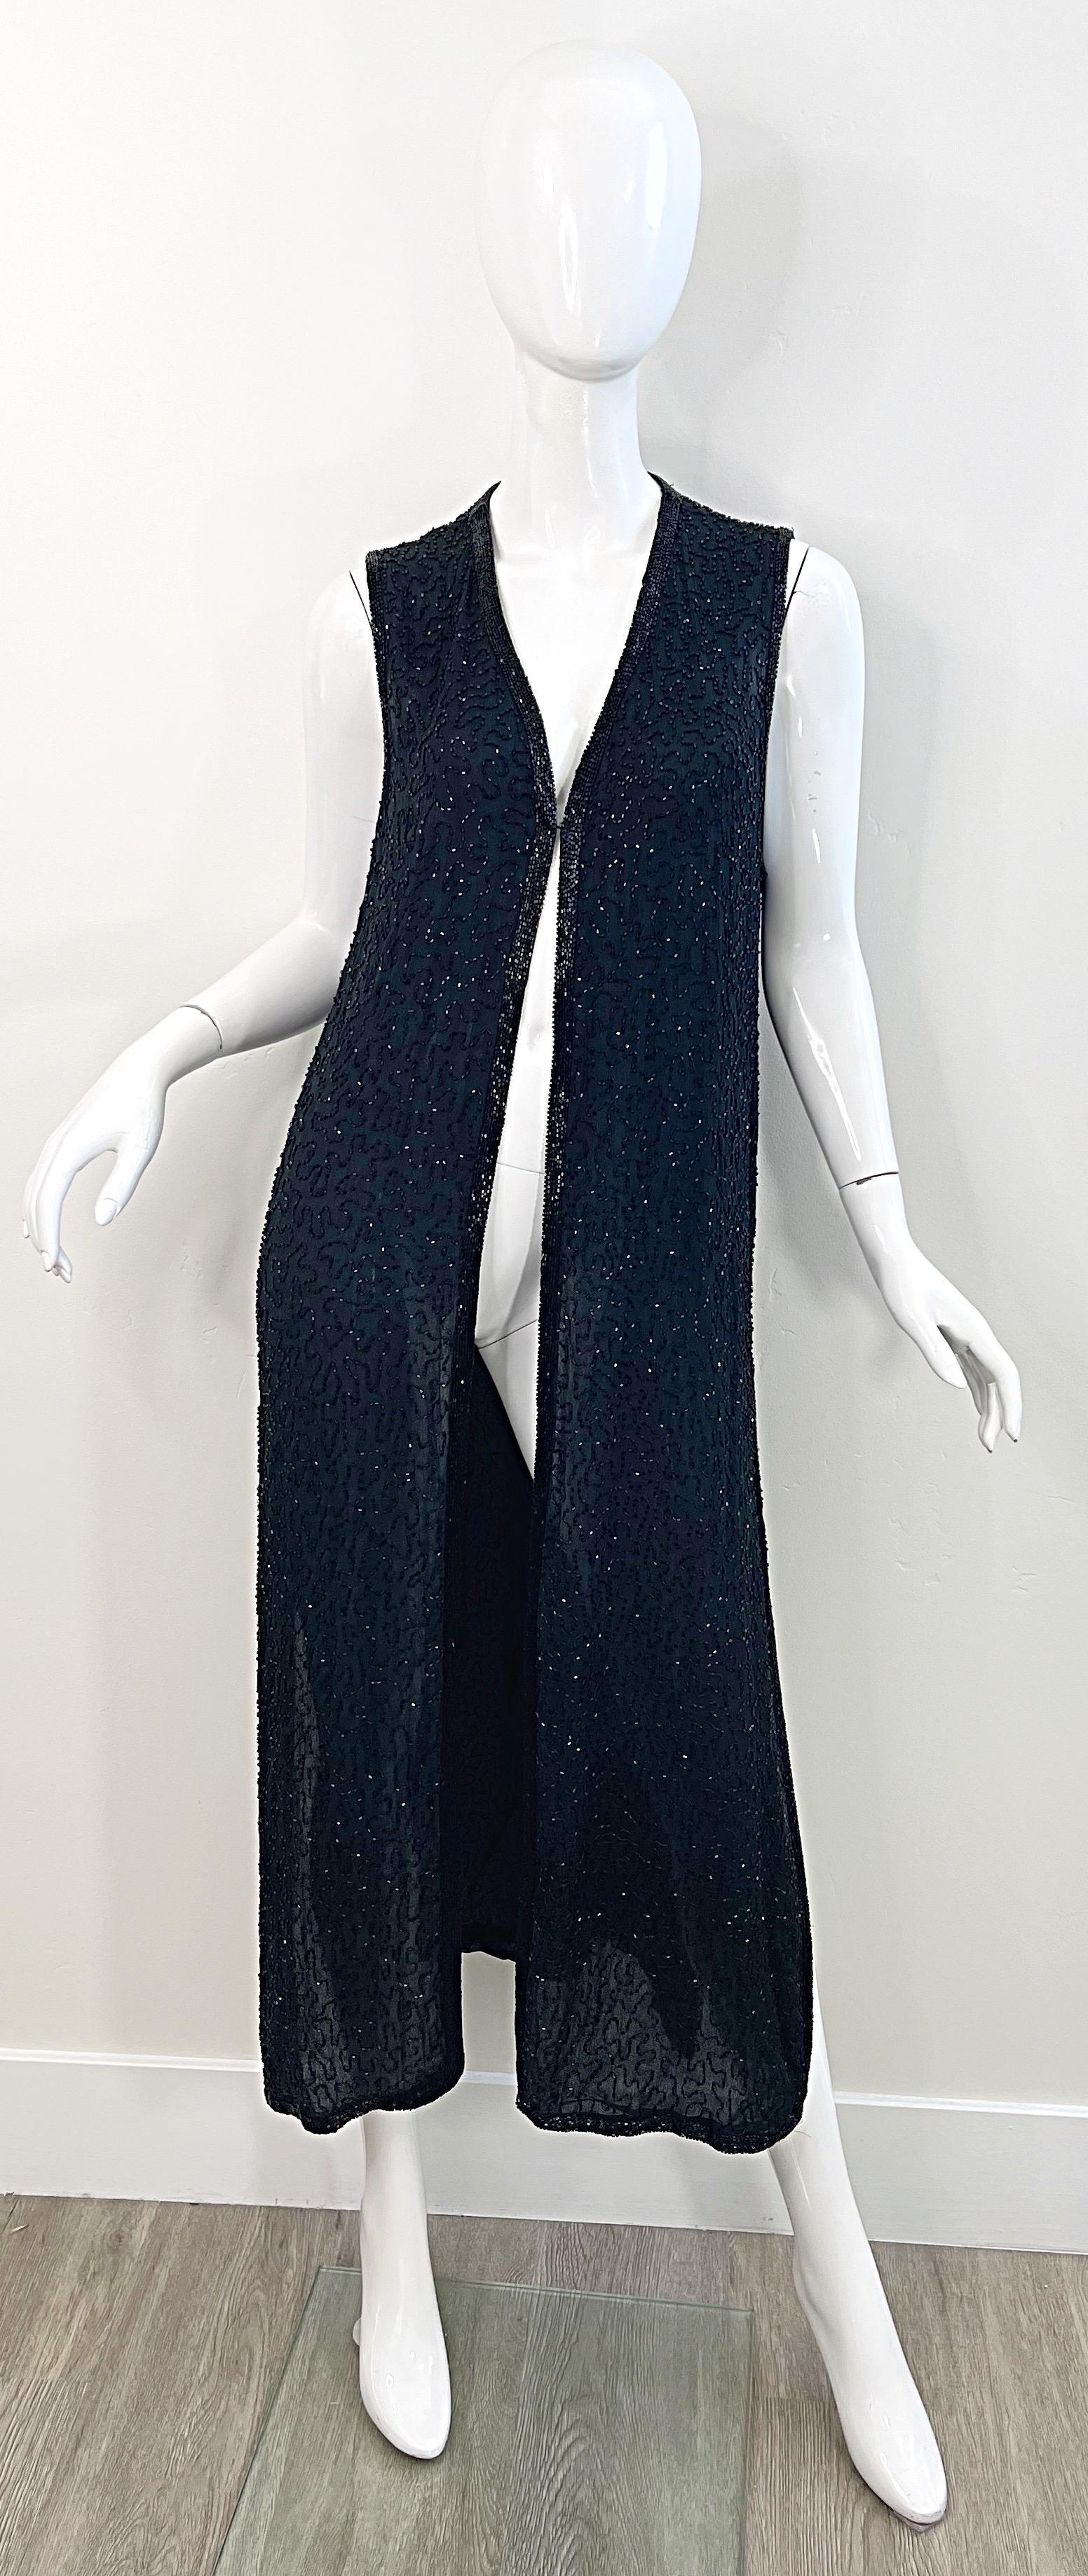 Chic vintage early 90s JUDITH ANN black silk chiffon fully beaded sleeveless duster maxi vest ! Features thousands of hand-sewn black seed beads throughout. Single hook-and-eye closure at bust. Vents at each side of the hem. Easy to dress up or